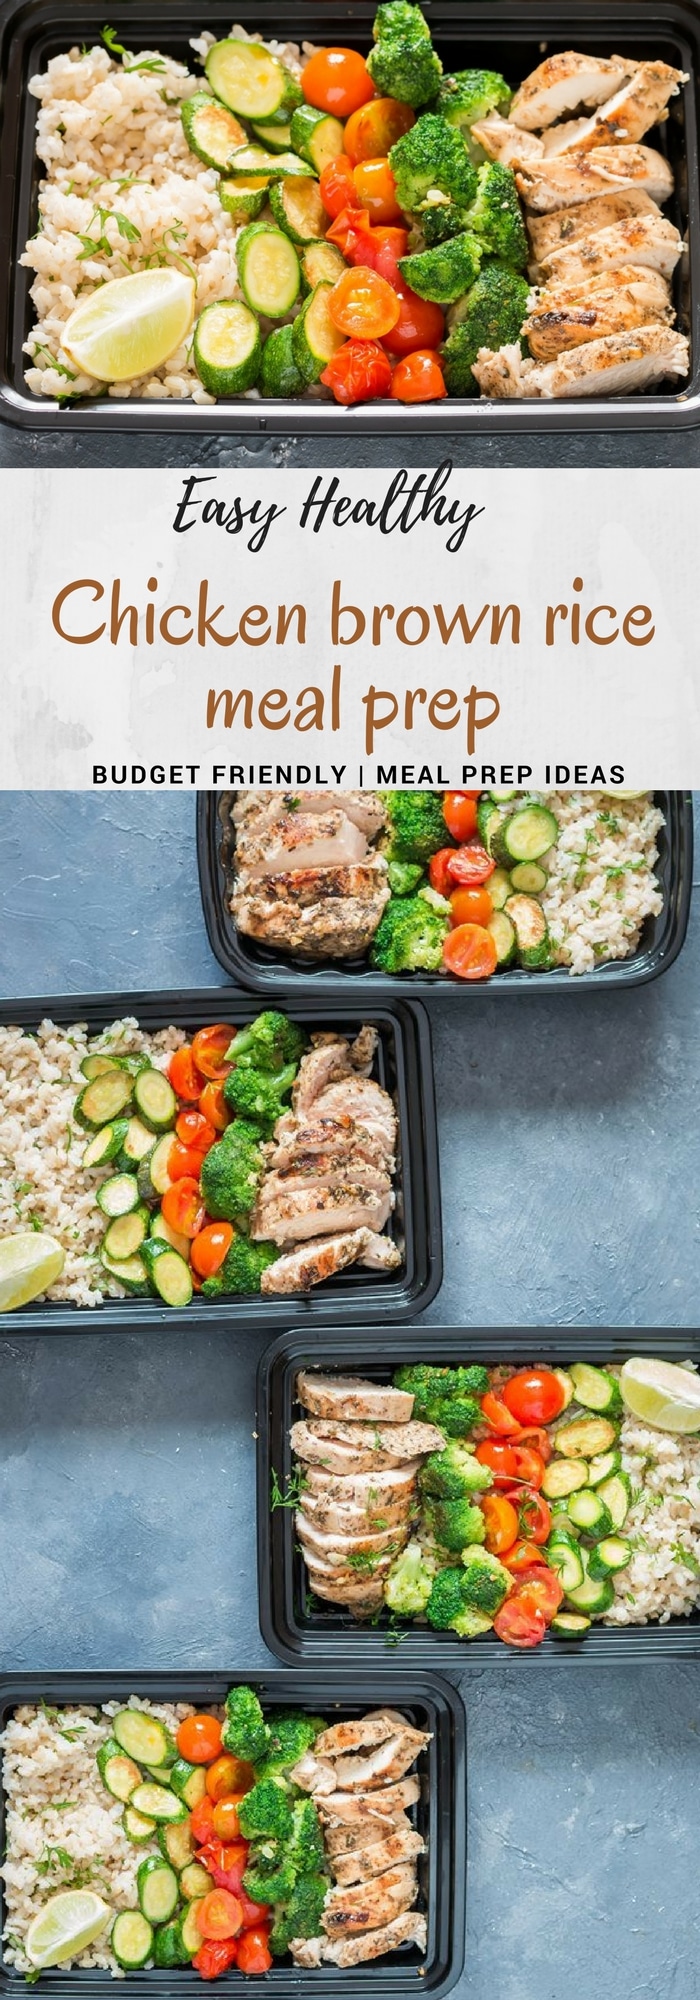 chicken meal prep with brown rice with text overlay